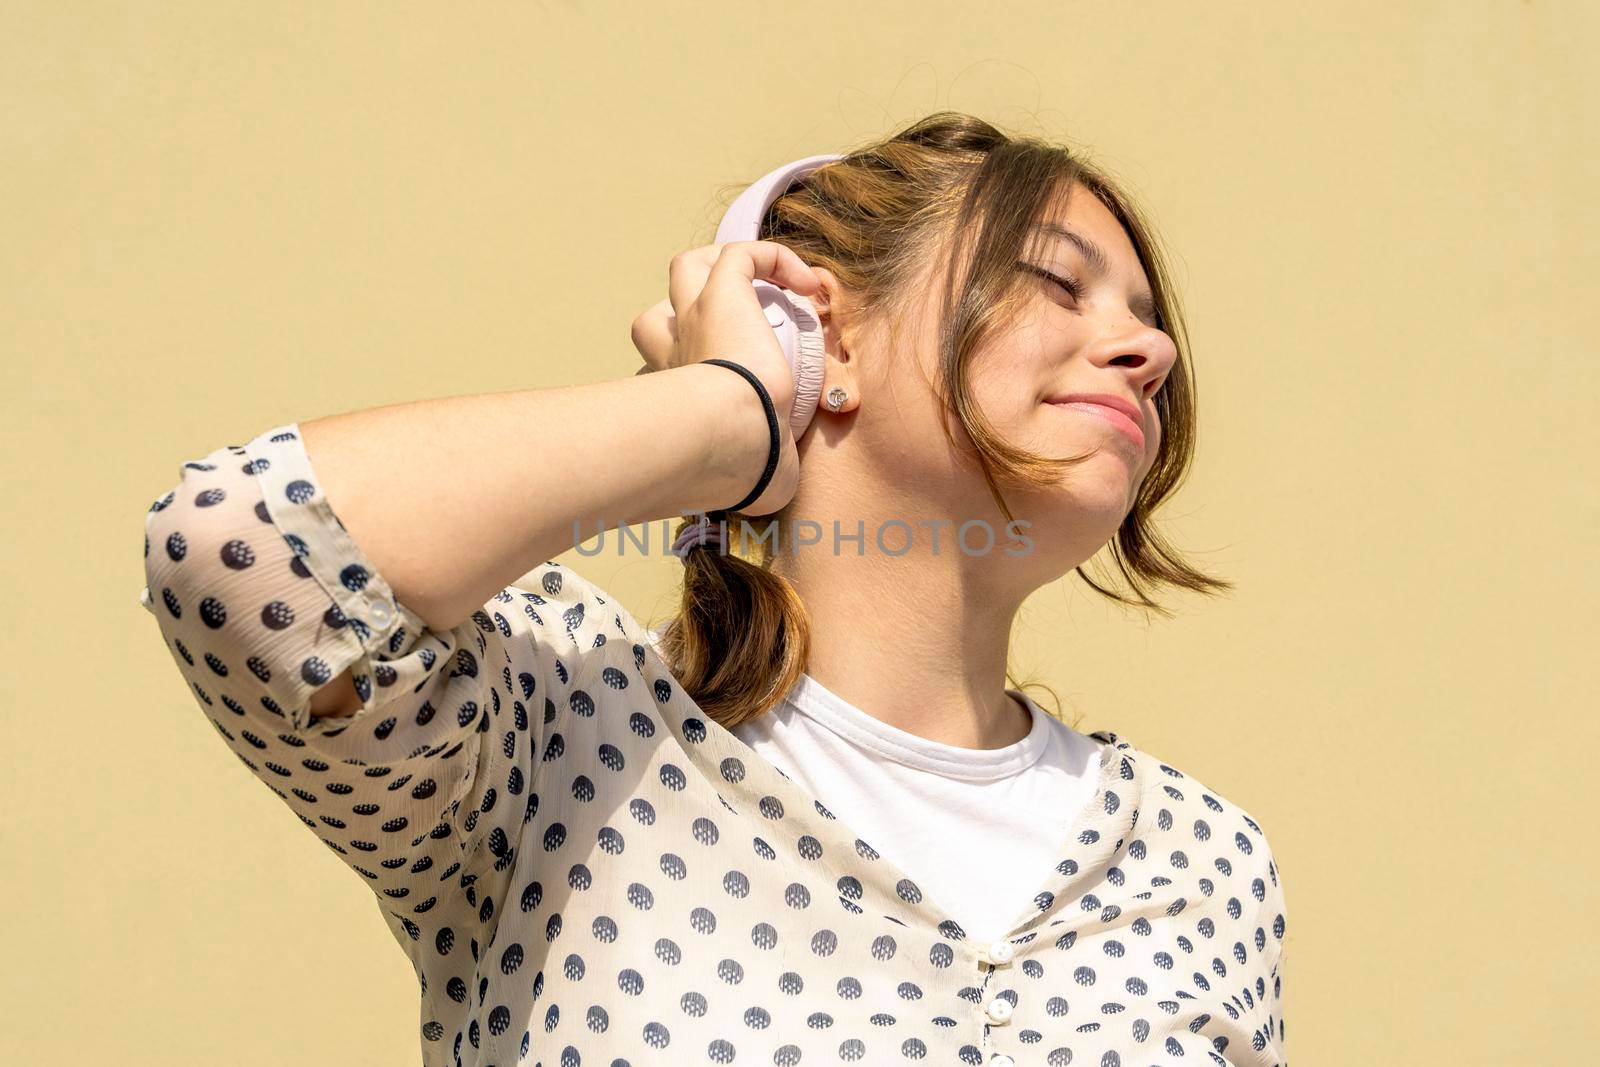 Teenage cute Caucasian girl has a good time listening to music with headphones. a beautiful fashionable girl enjoys music. a girl is dancing, listening to music with headphones, closing her eyes, against a yellow background